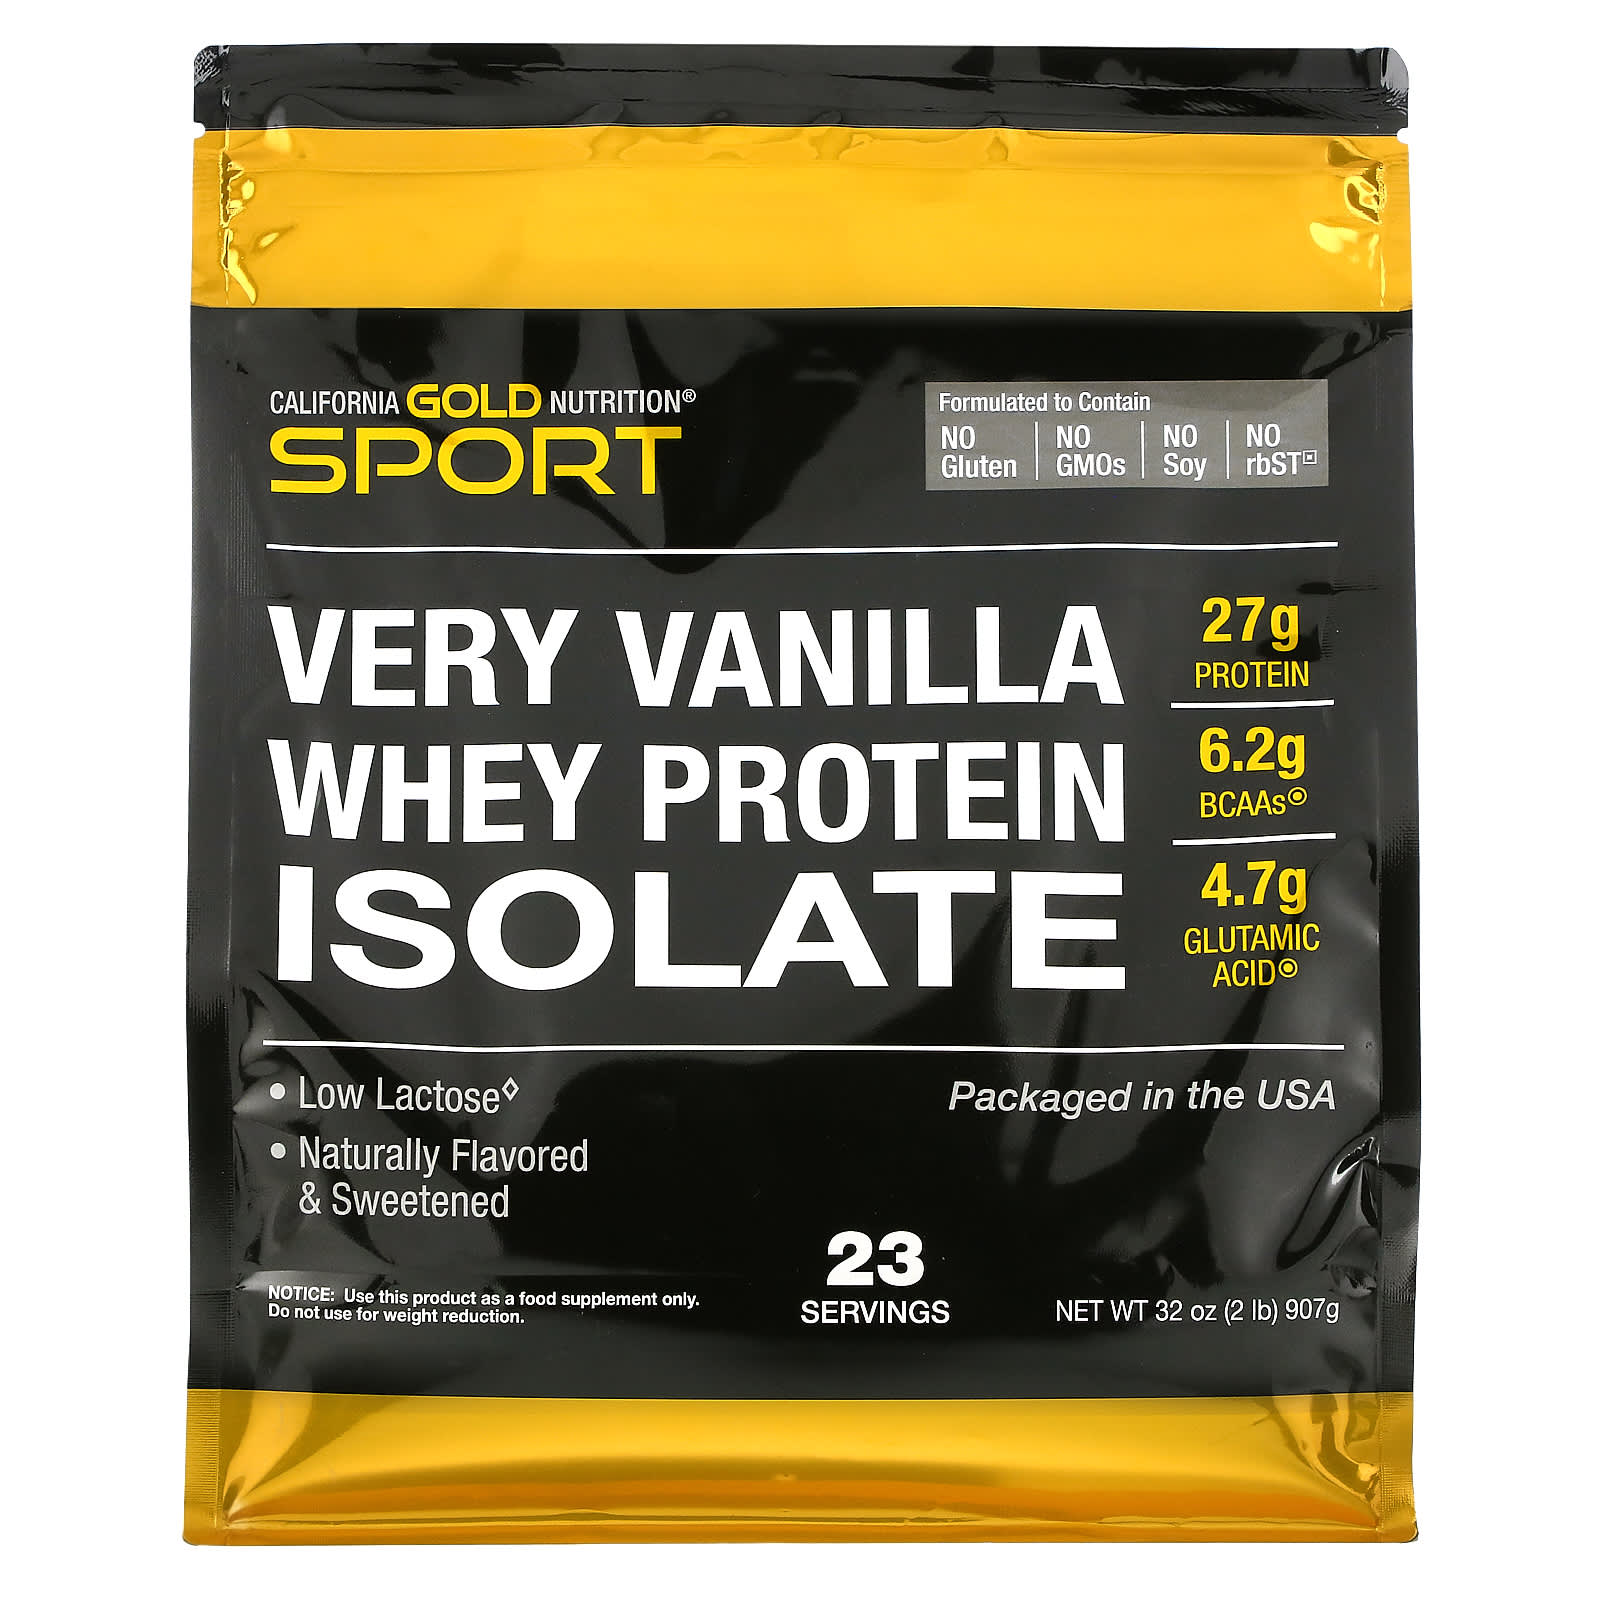 California Gold Nutrition-100% Whey Protein Isolate-Very Vanilla Flavor-2 lbs (907 g)